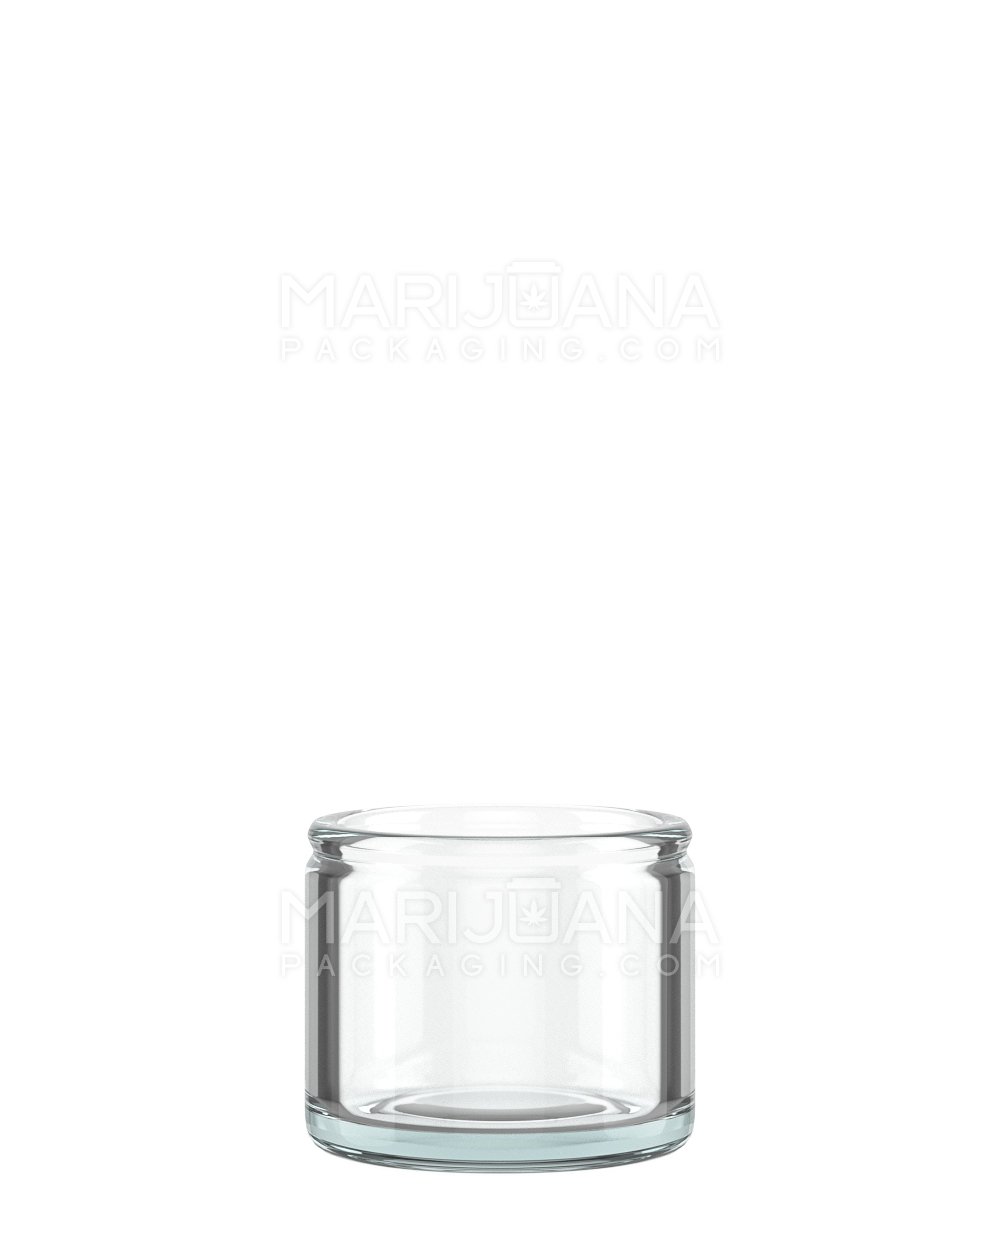 No Neck Clear Glass Concentrate Containers | 23mm - 6mL - 144 Count - 2